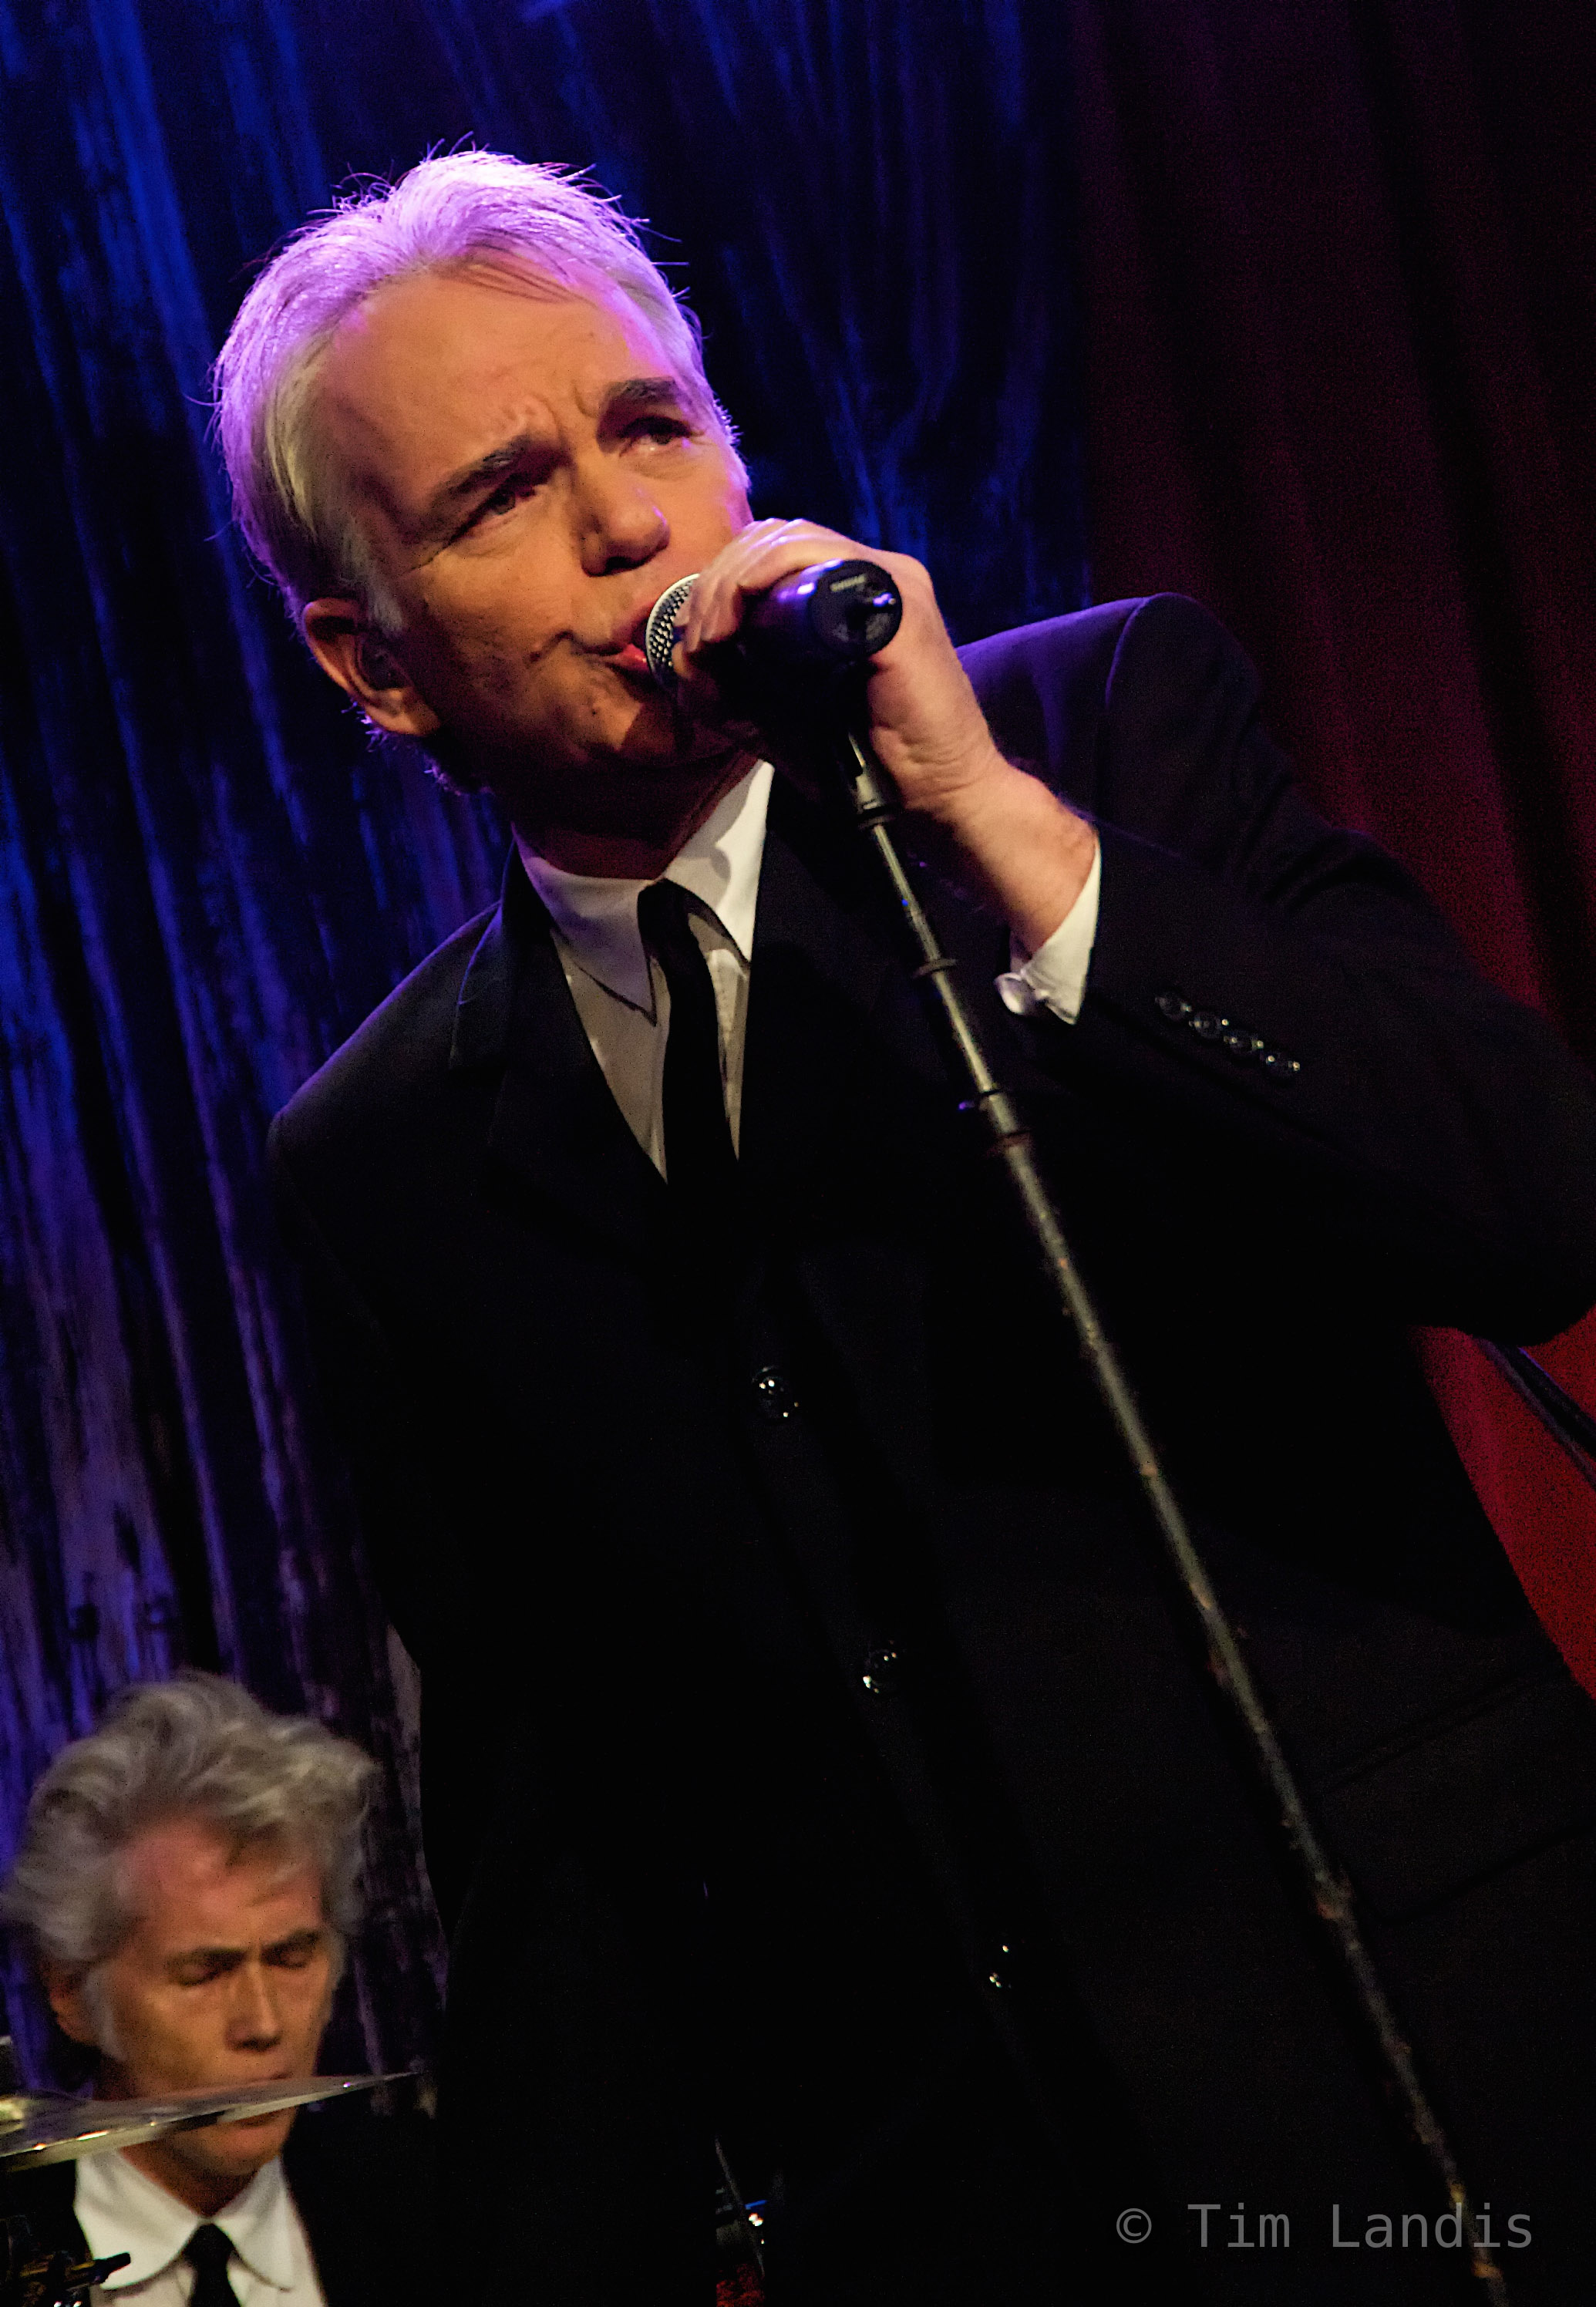 Billy Bob Thornton fronts his band the Boxmasters